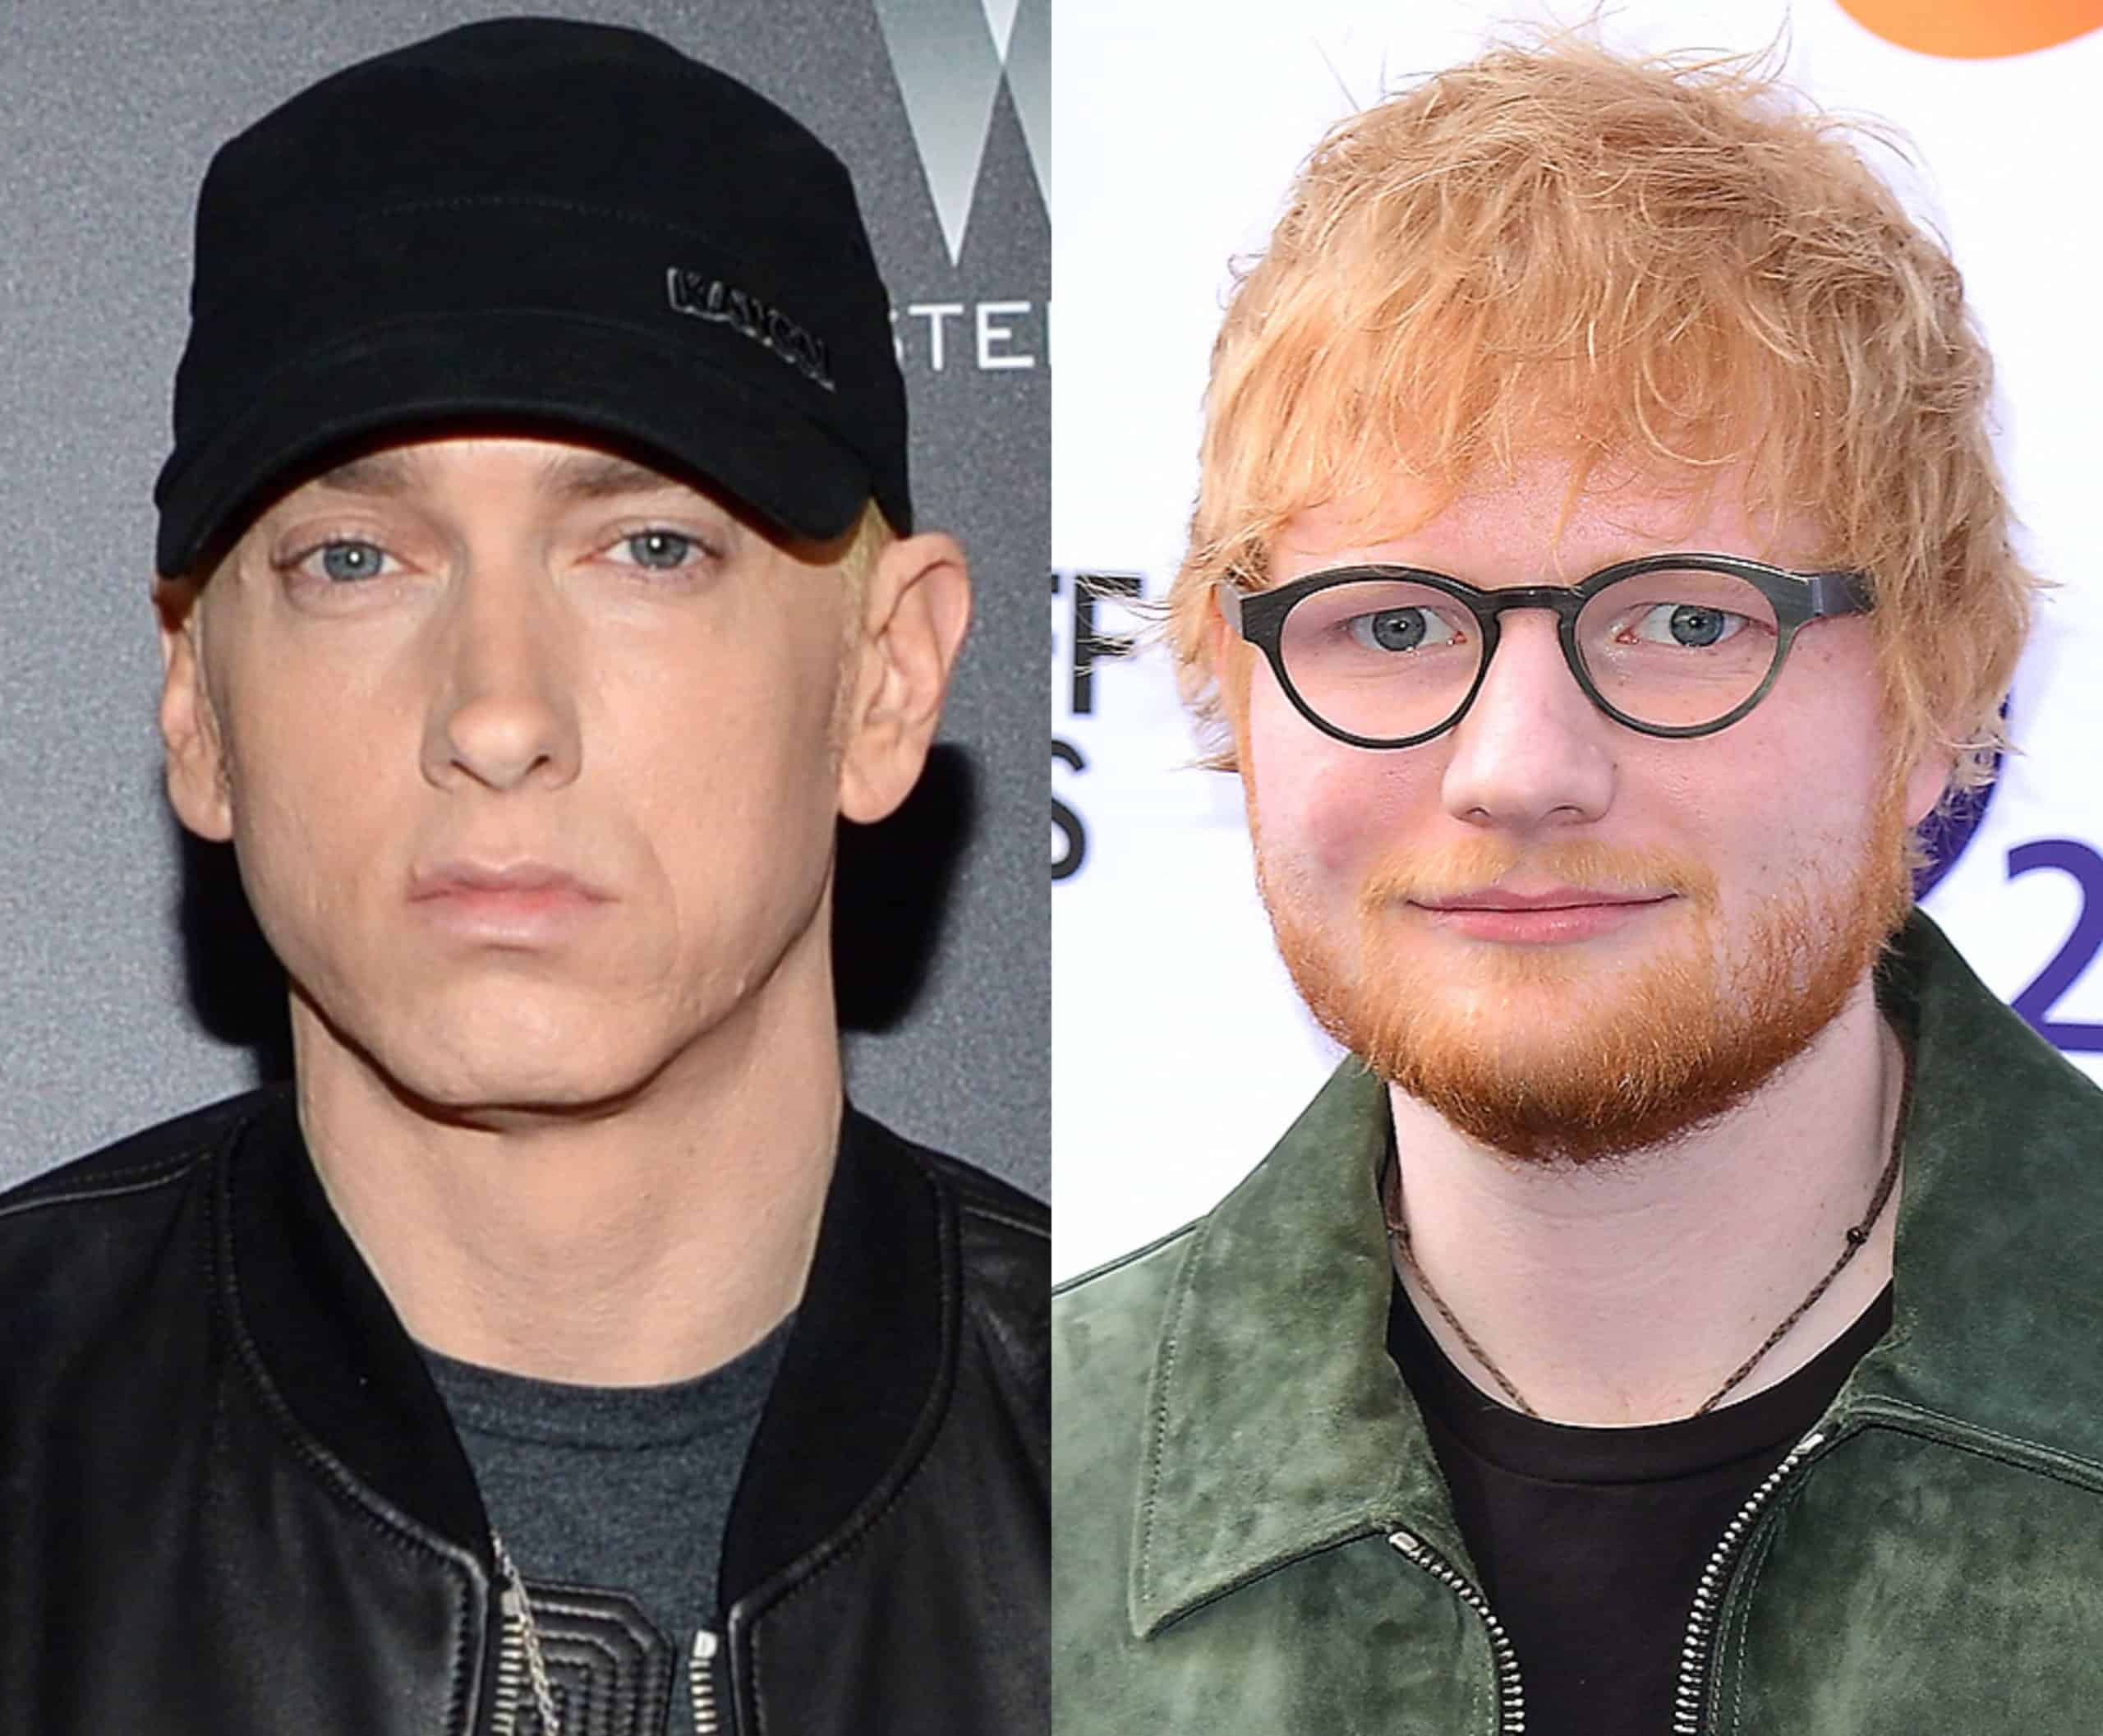 Ed Sheeran Reveals A Mutual Interest with Eminem That Made Them Good Friends